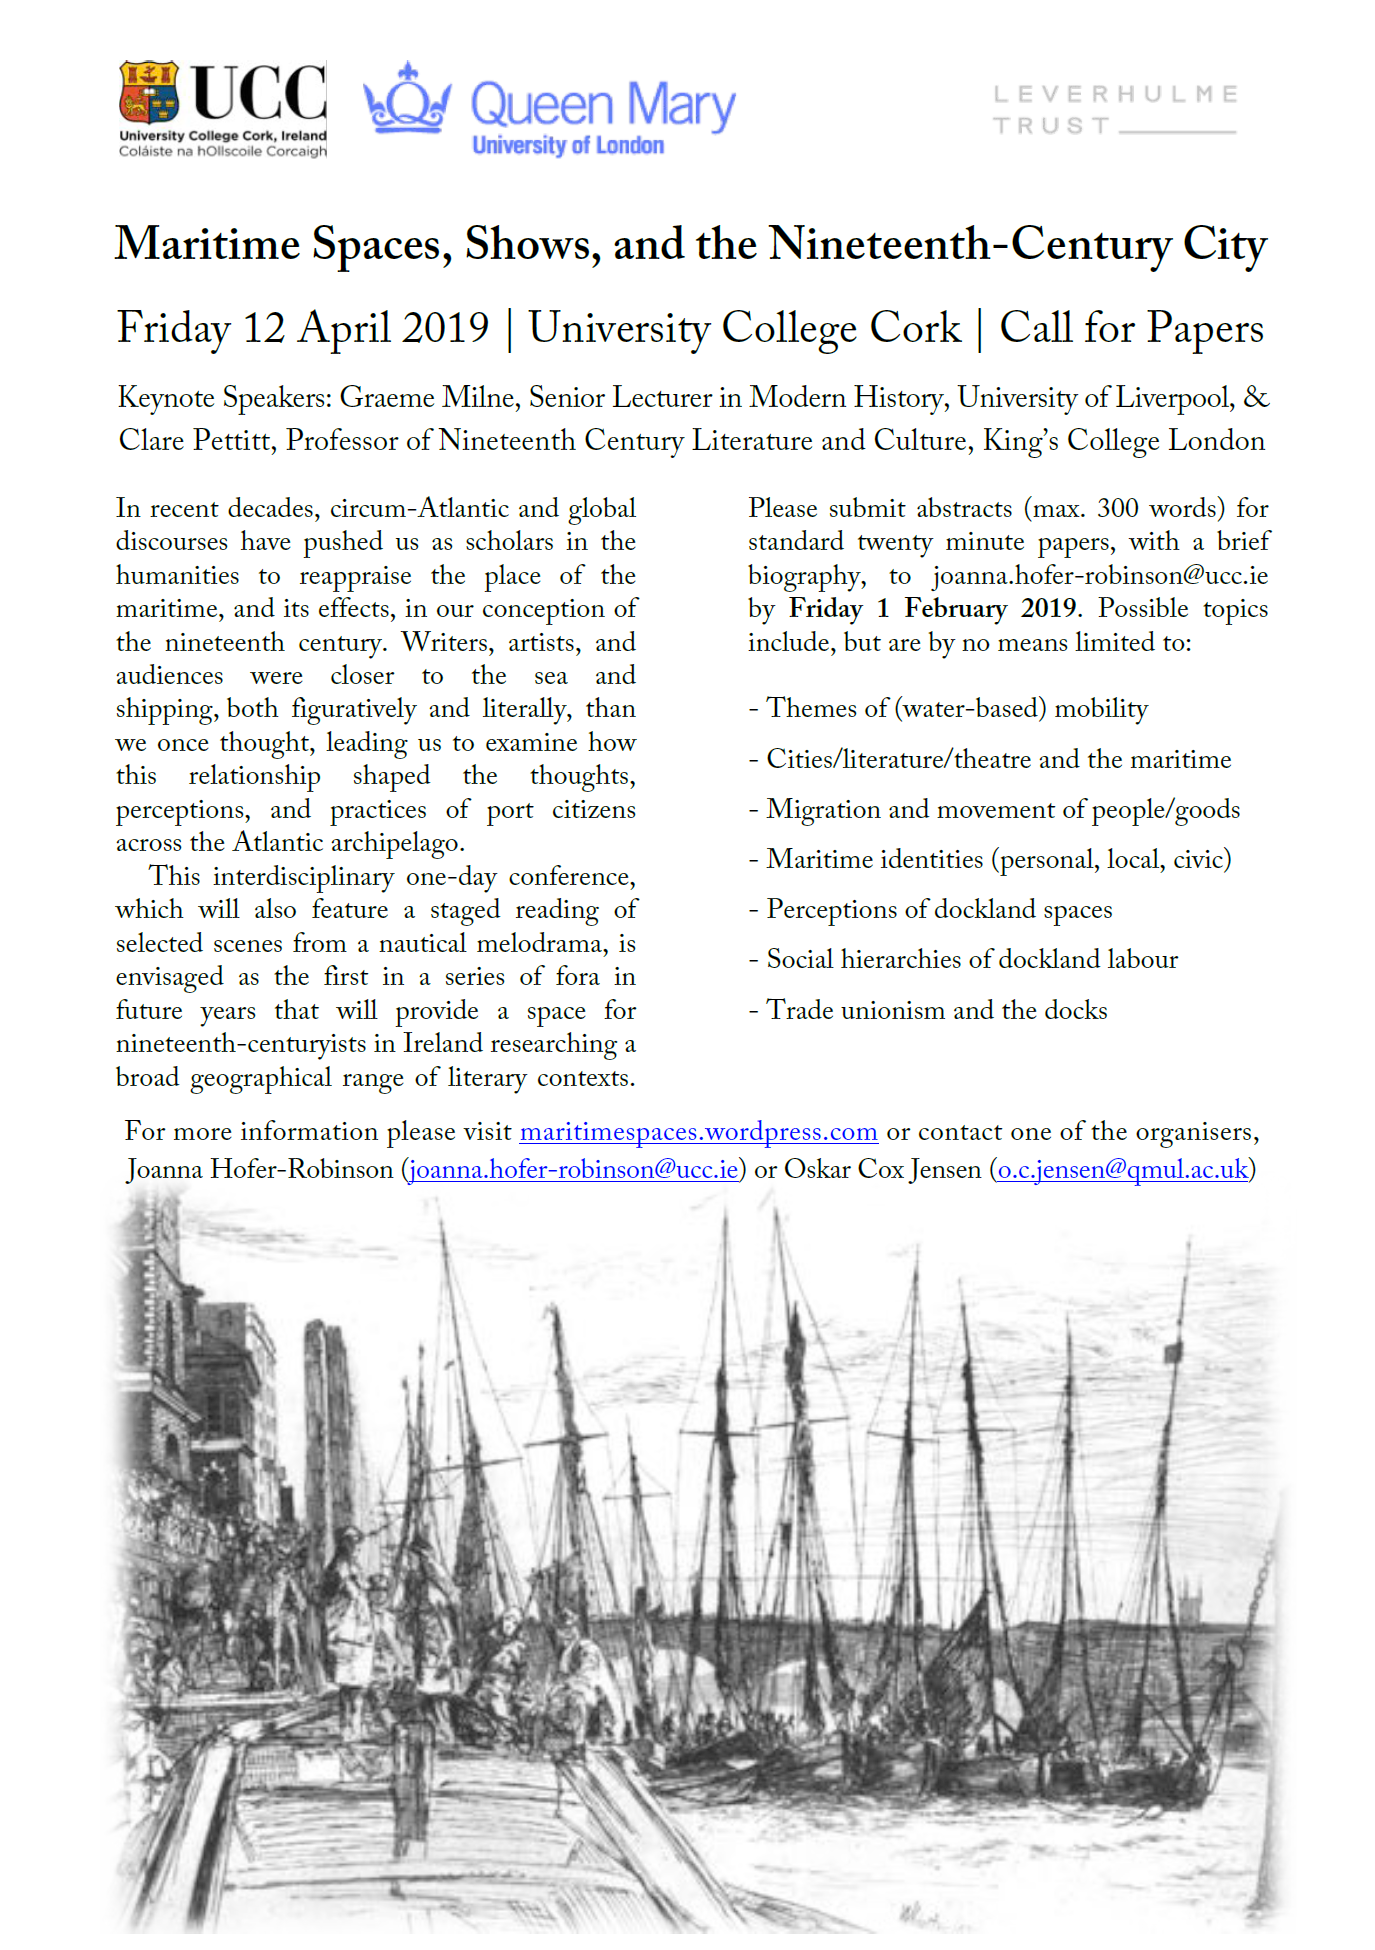 Call for Papers: Maritime Spaces, Shows, and the Nineteenth-Century City